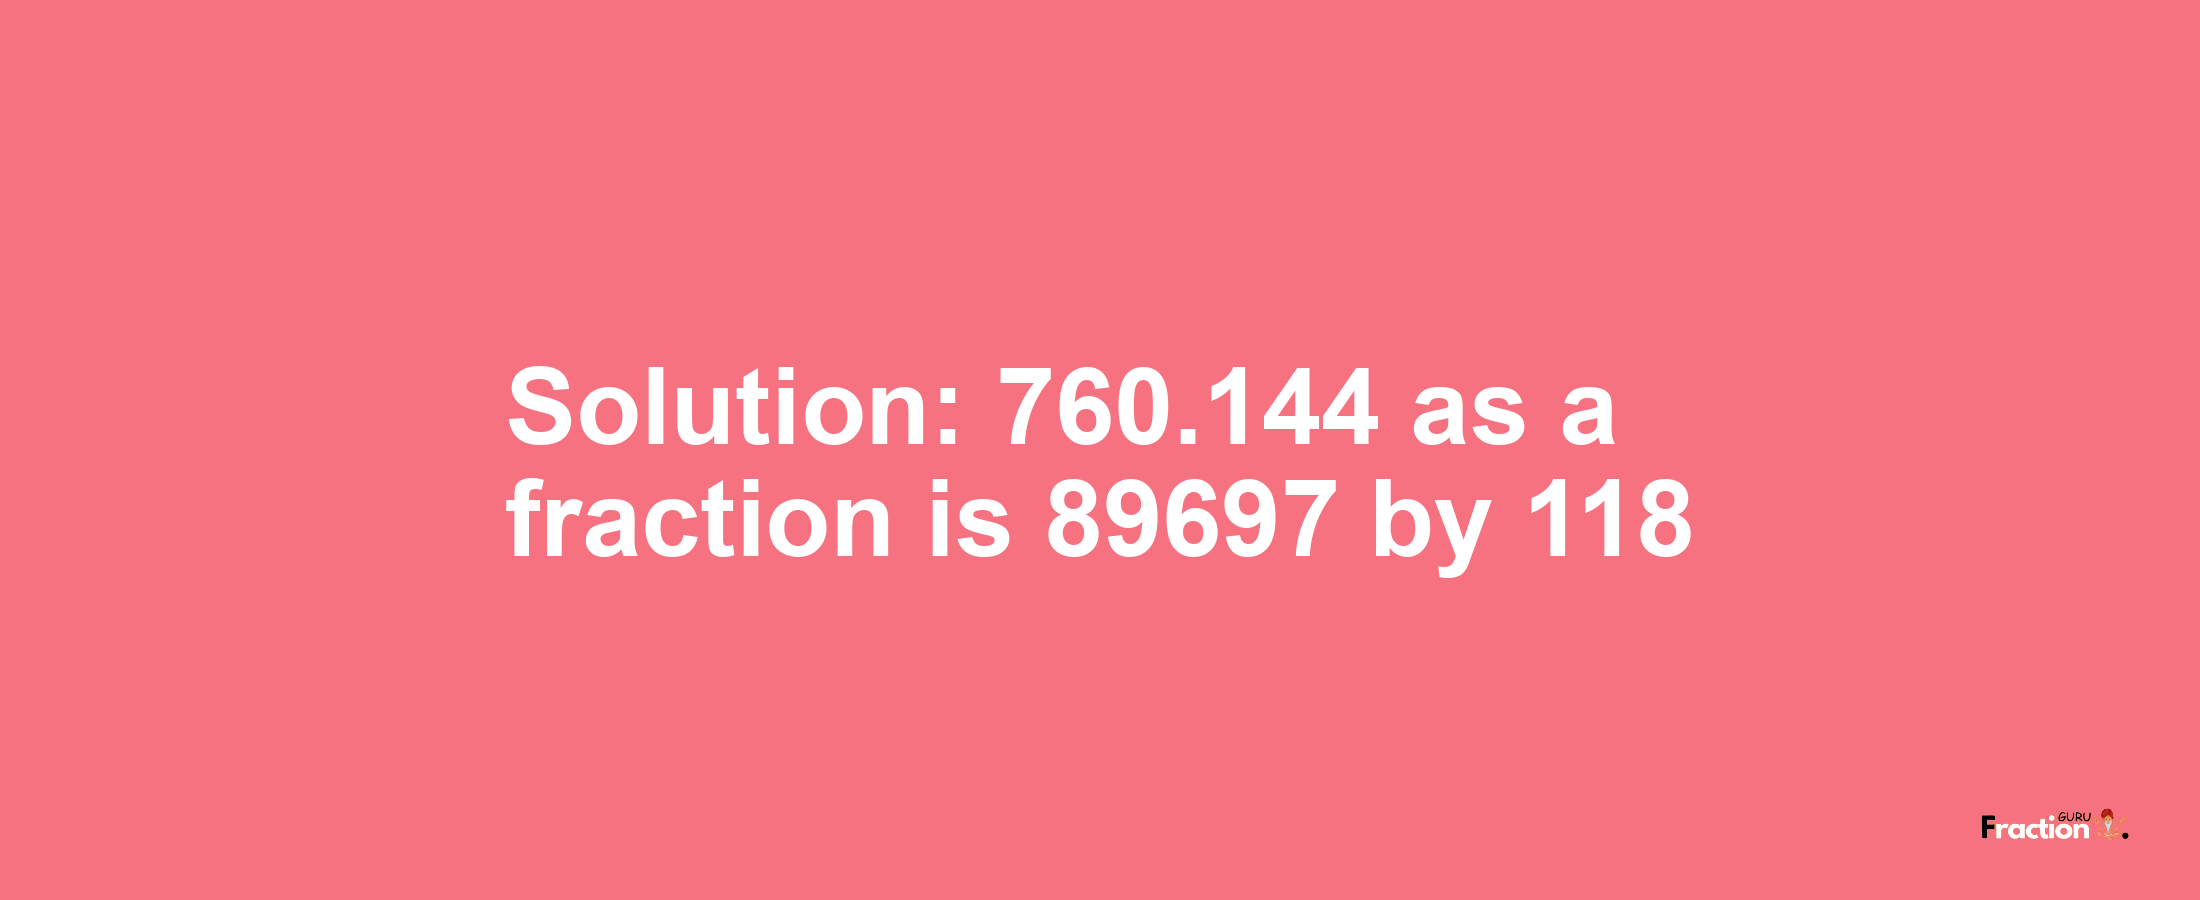 Solution:760.144 as a fraction is 89697/118